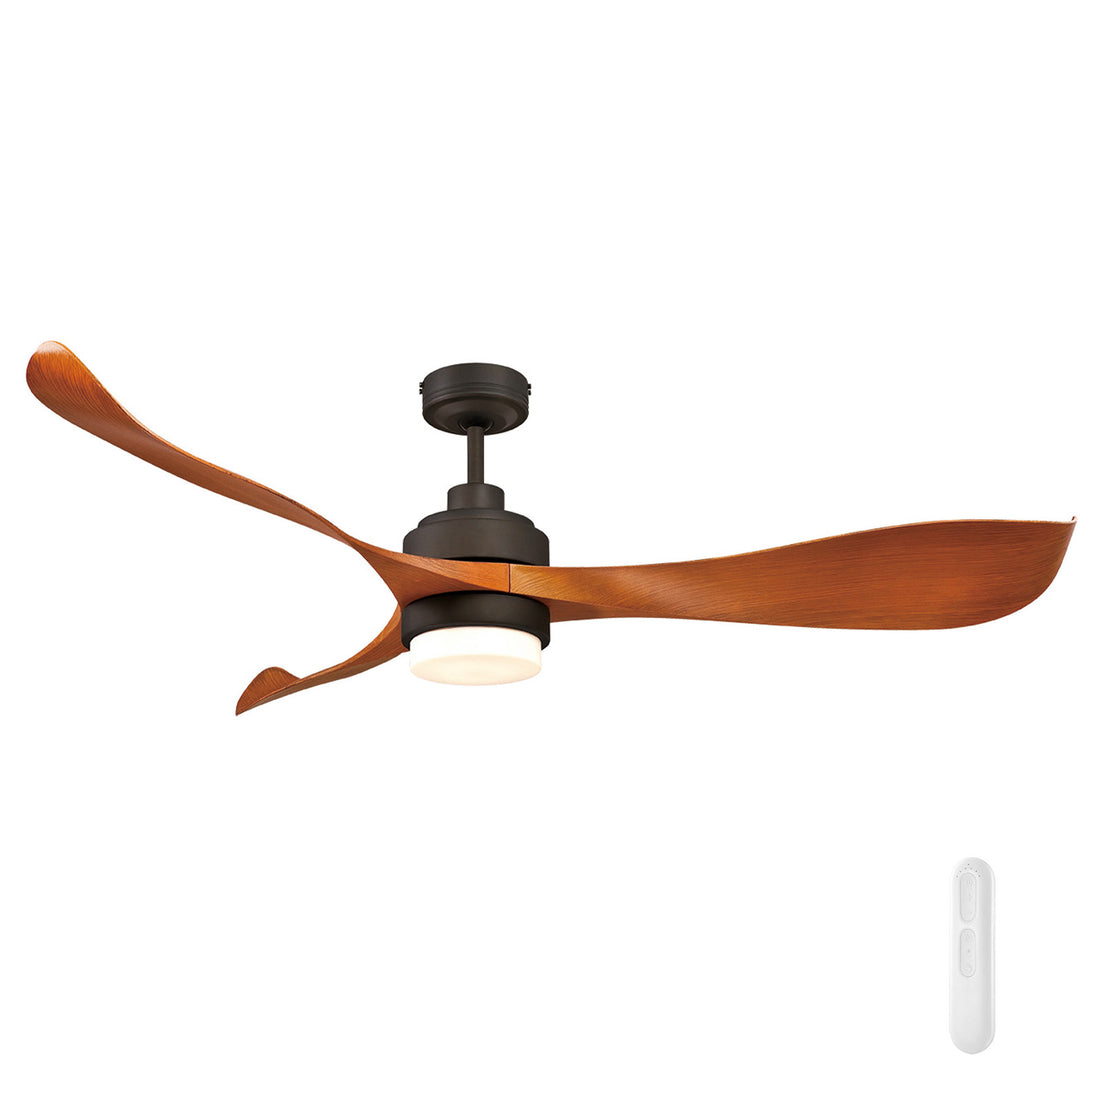 Eagle 141cm DC Ceiling Fans with LED Light and Remote